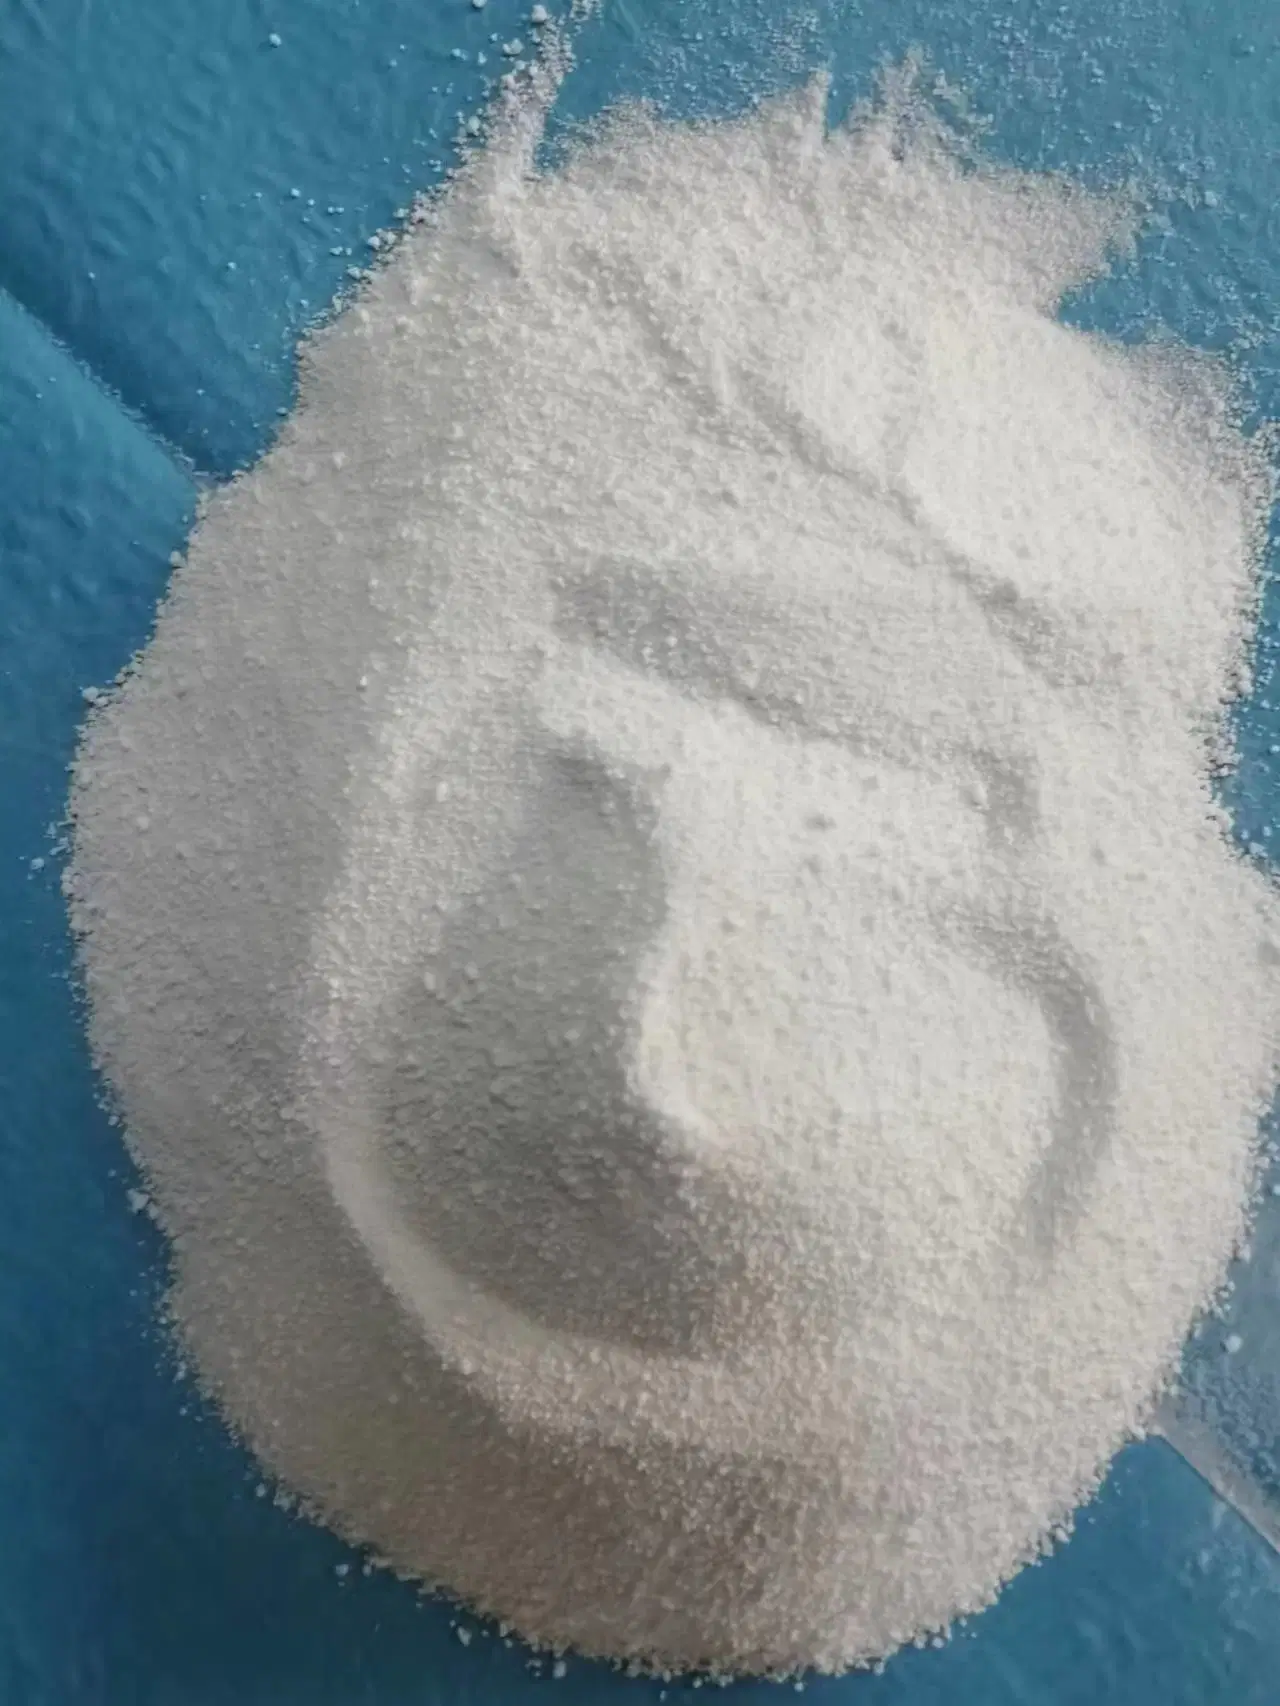 High Purity Sodium Acetate Trihydrate Powder with CAS No. 6131-90-4